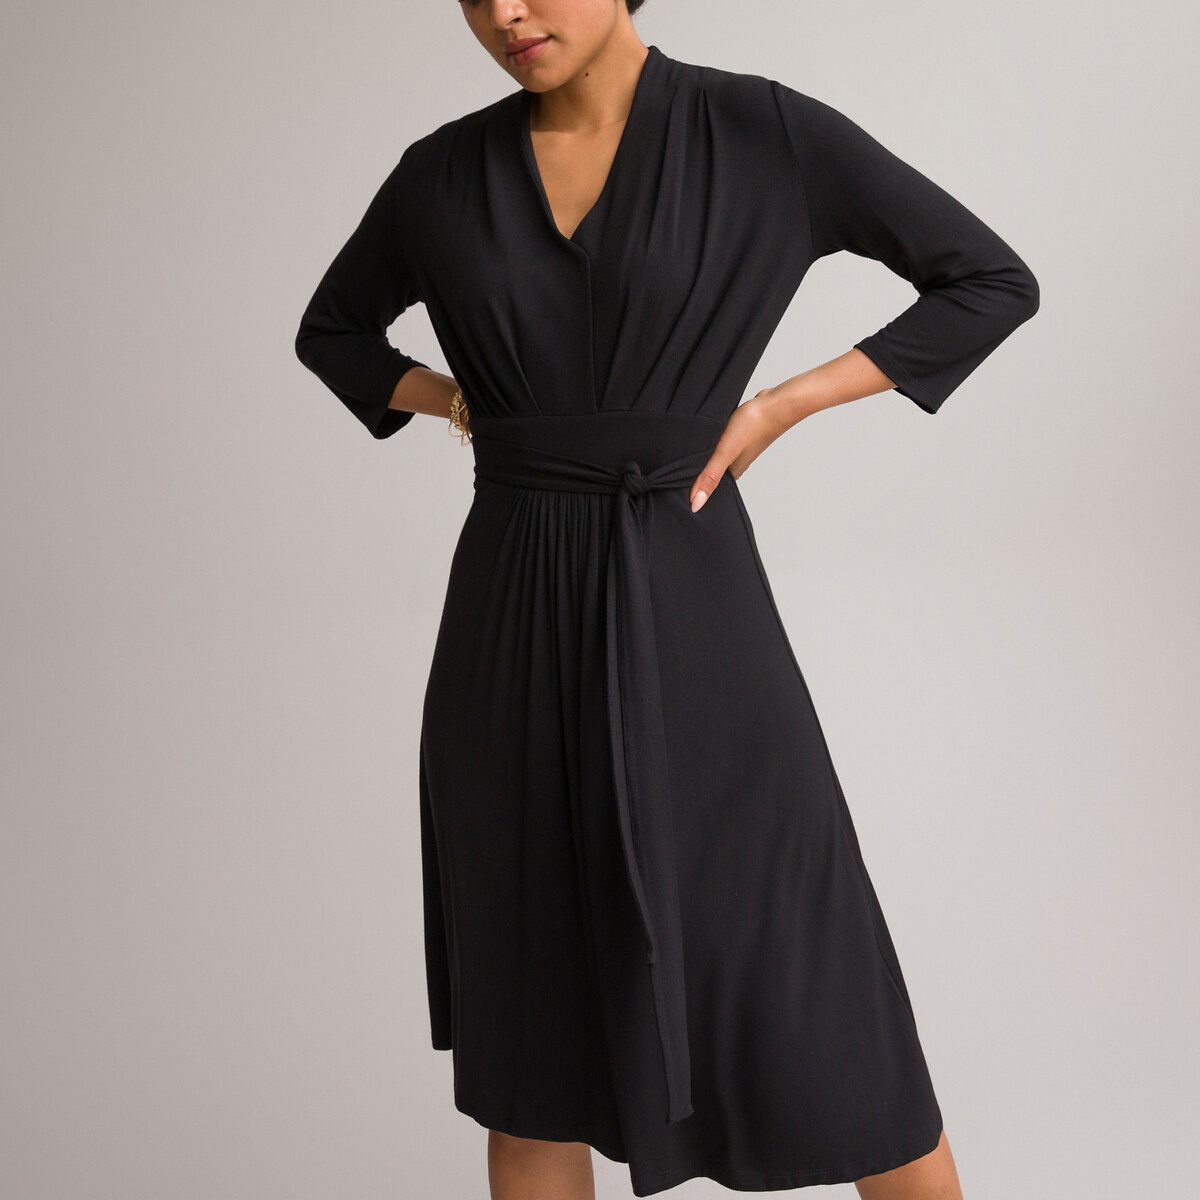 Full Draping Dress with 3/4 Length Sleeves